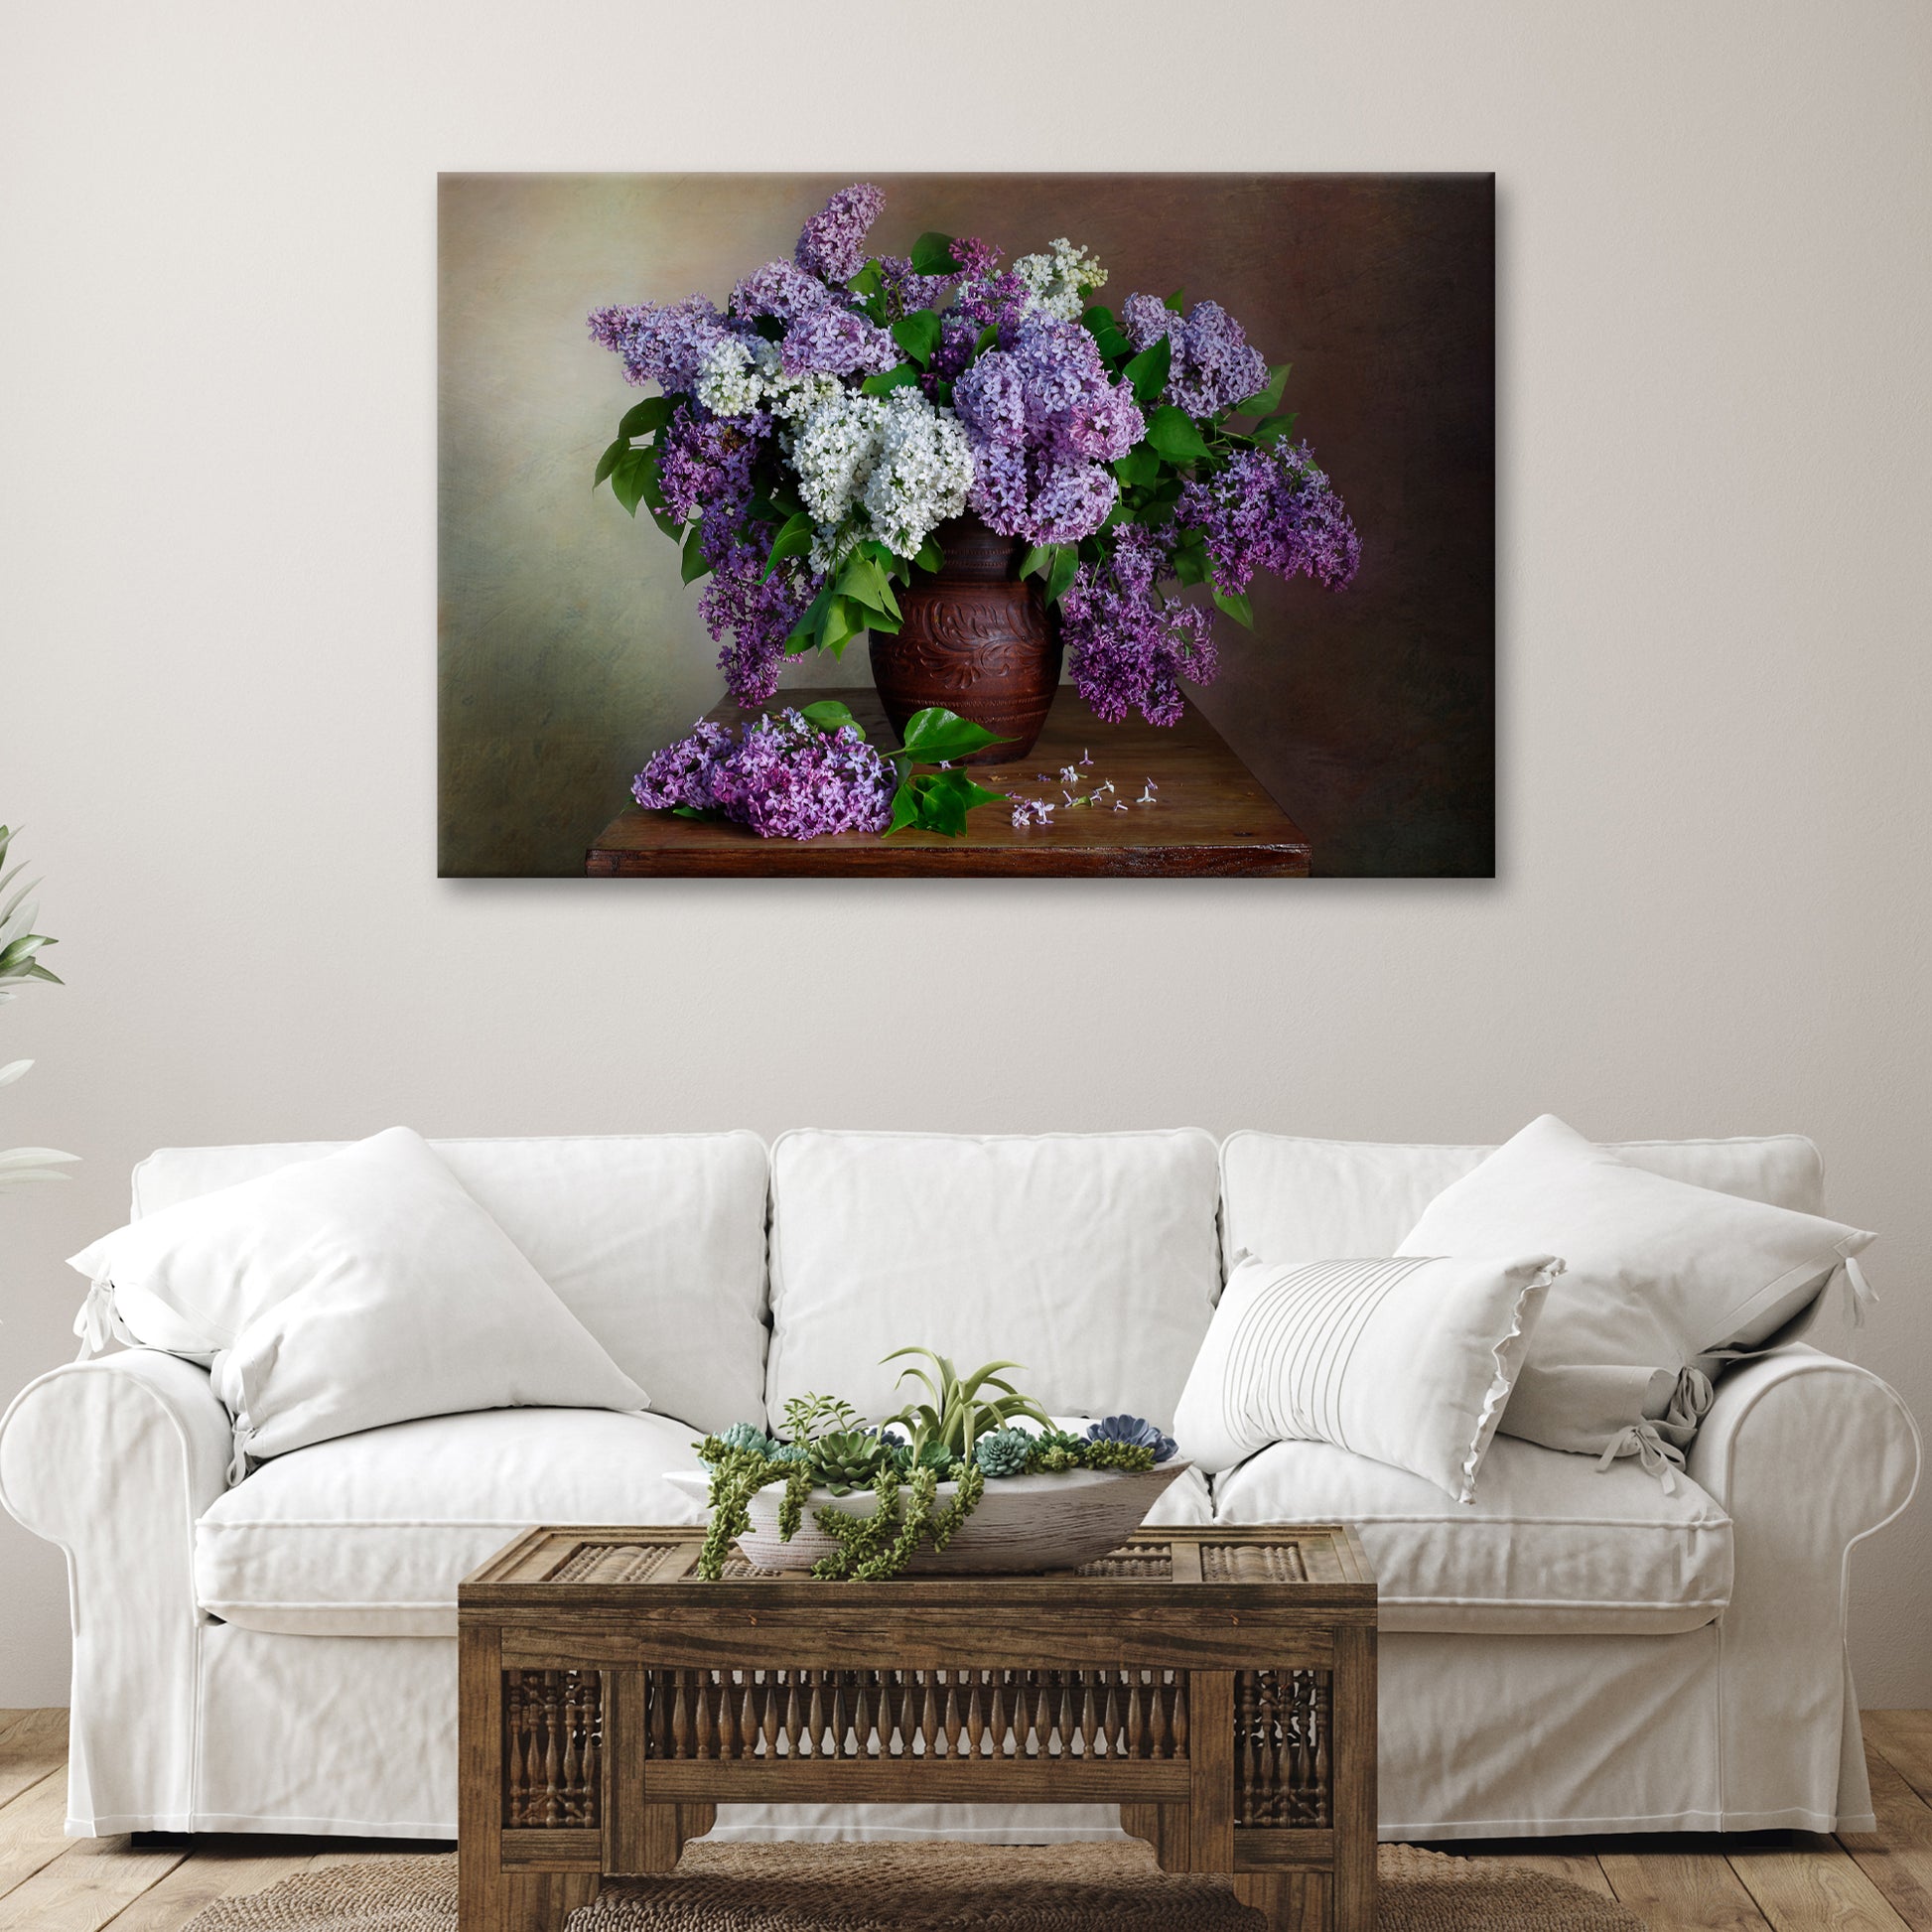 Flowers Lilac Vase Canvas Wall Art - Image by Tailored Canvases